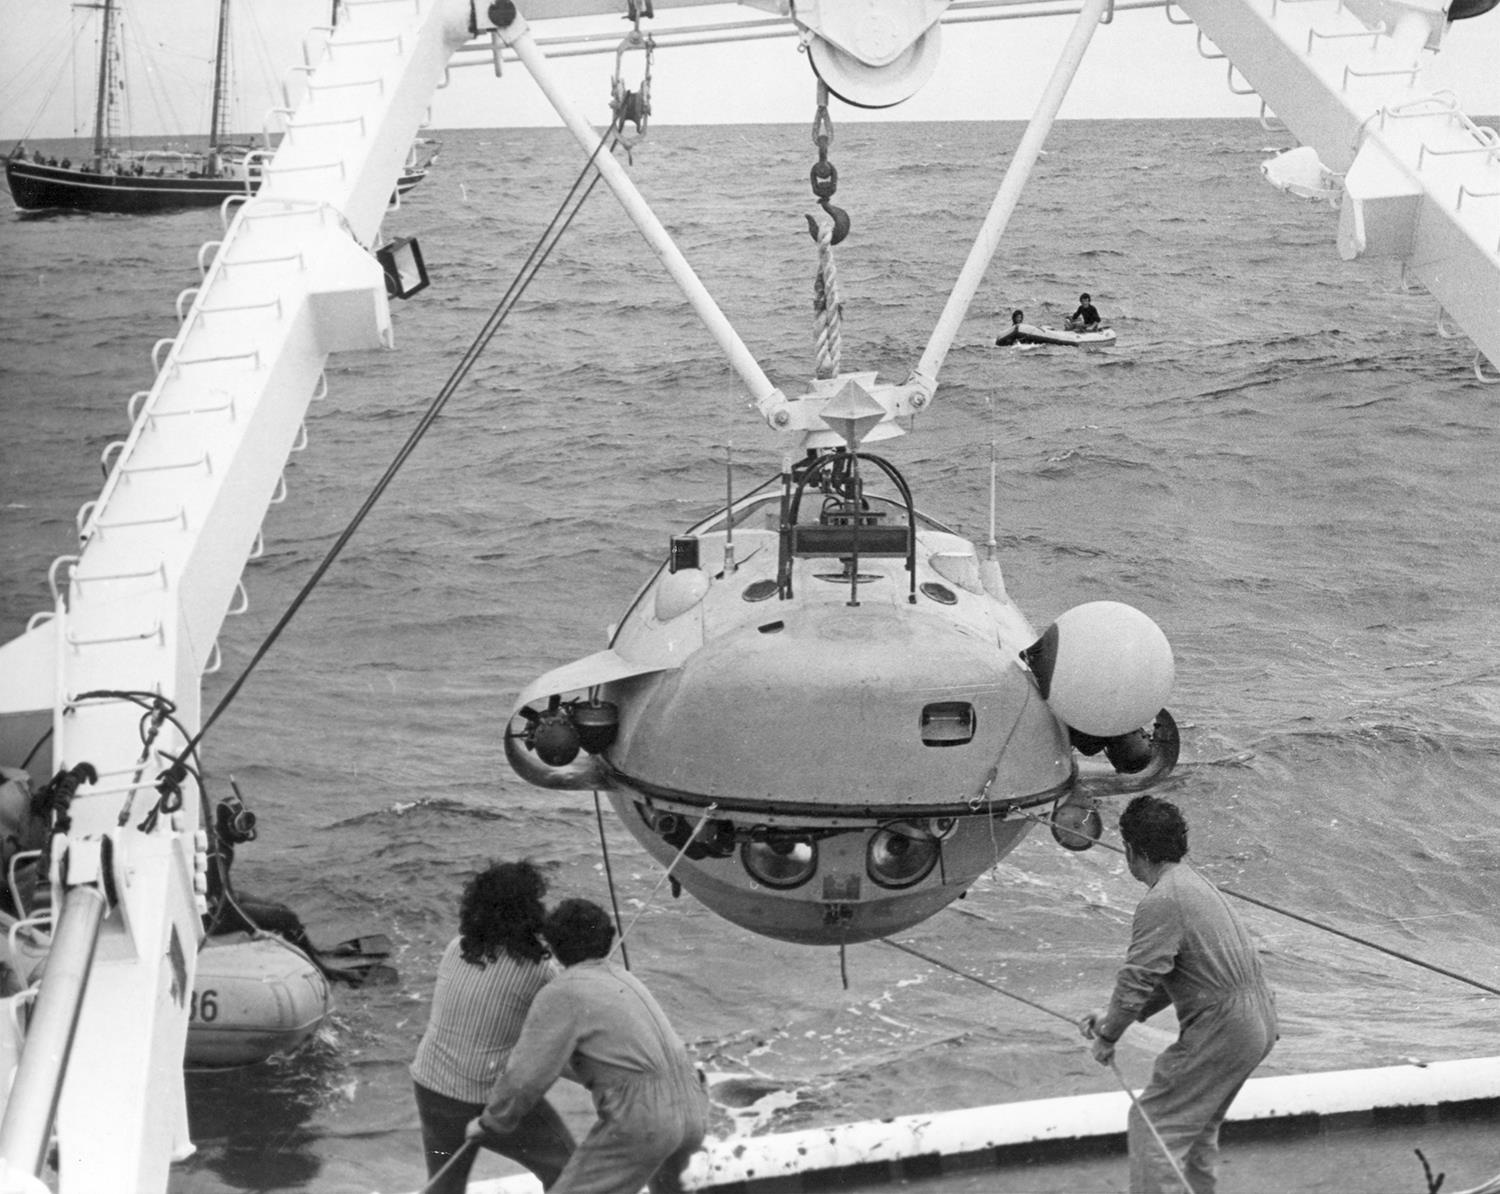 The French submersible Cyana is launched into the North Atlantic in 1974 as part of the French-American Mid-Ocean Undersea Study (Project FAMOUS). The submersible, together with the Woods Hole Oceanographic Institute-operated Alvin and the French bathyscaphe Archimede, took ocean scientists to the seafloor for the first-ever exploration of a rift valley and mid-ocean ridge.